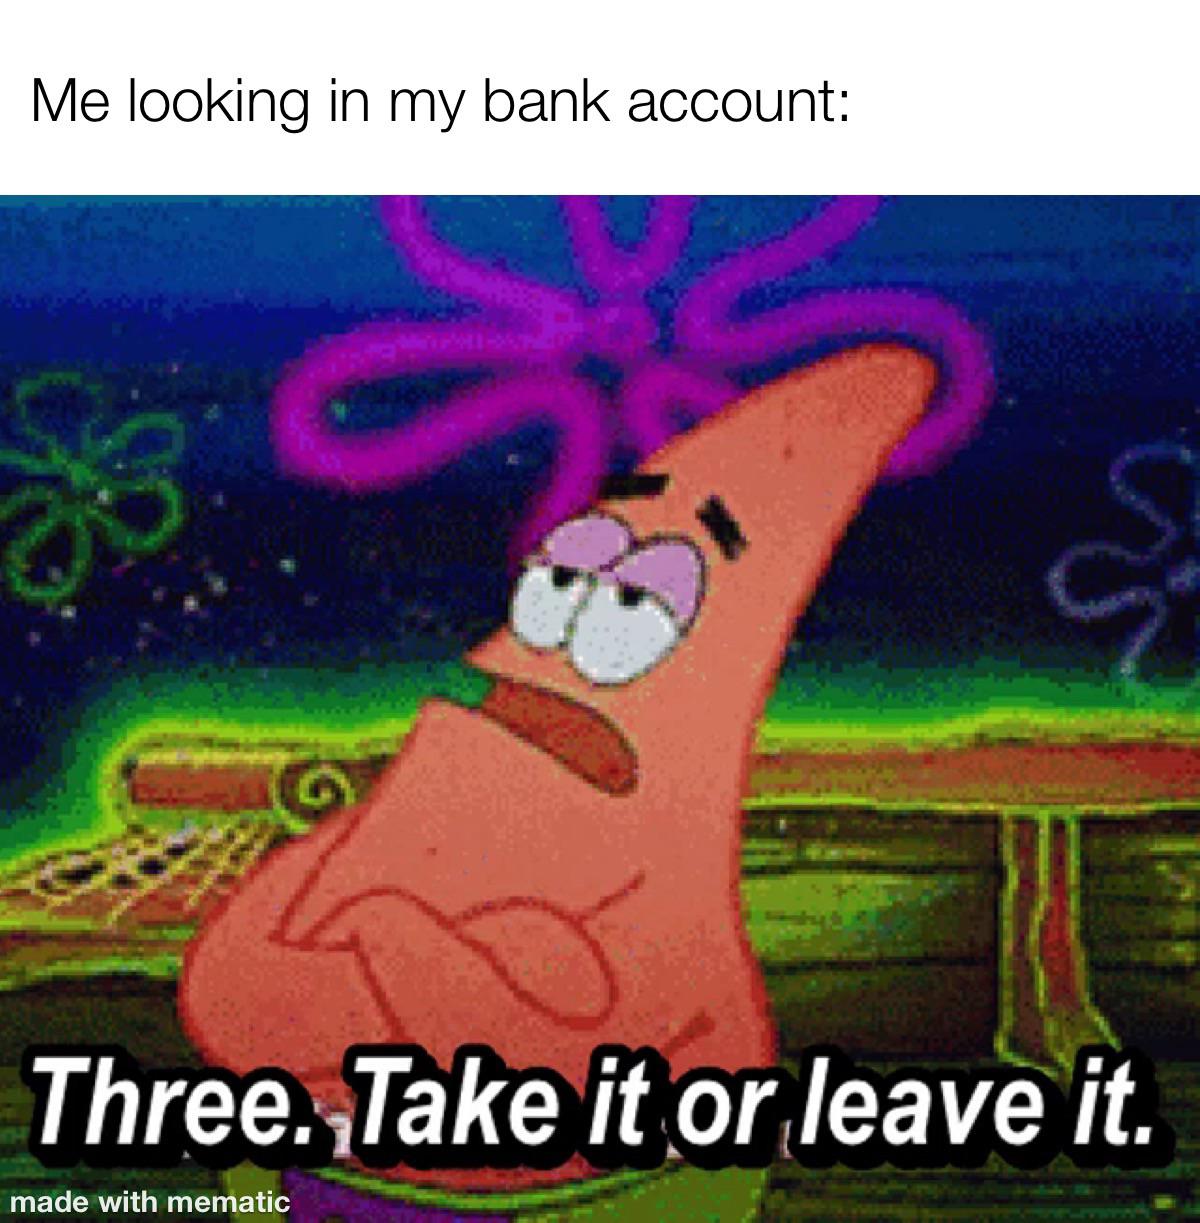 spongebob meme 2020- take it or leave it memes - Me looking in my bank account Three. Take it or leave it. made with mematic